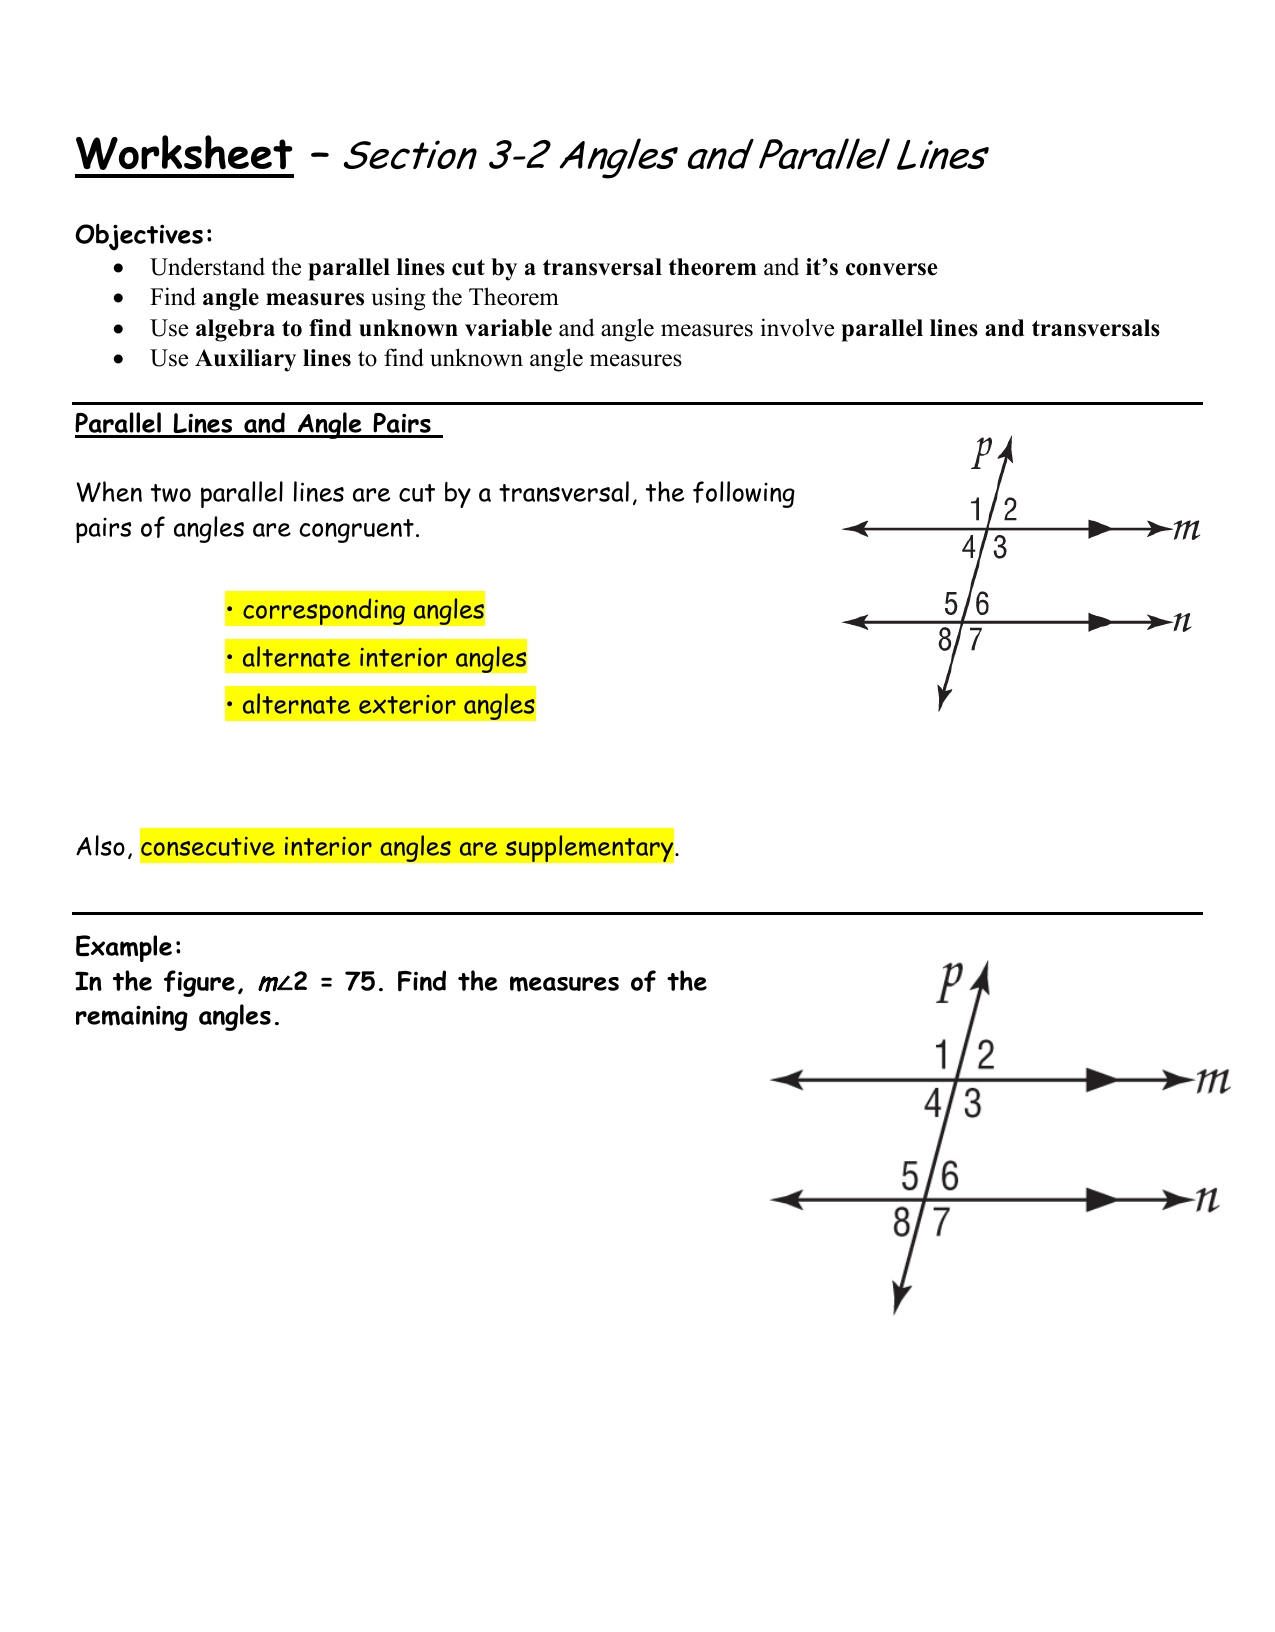 Worksheet Section 22 Angles and Parallel Lines For Angles And Parallel Lines Worksheet